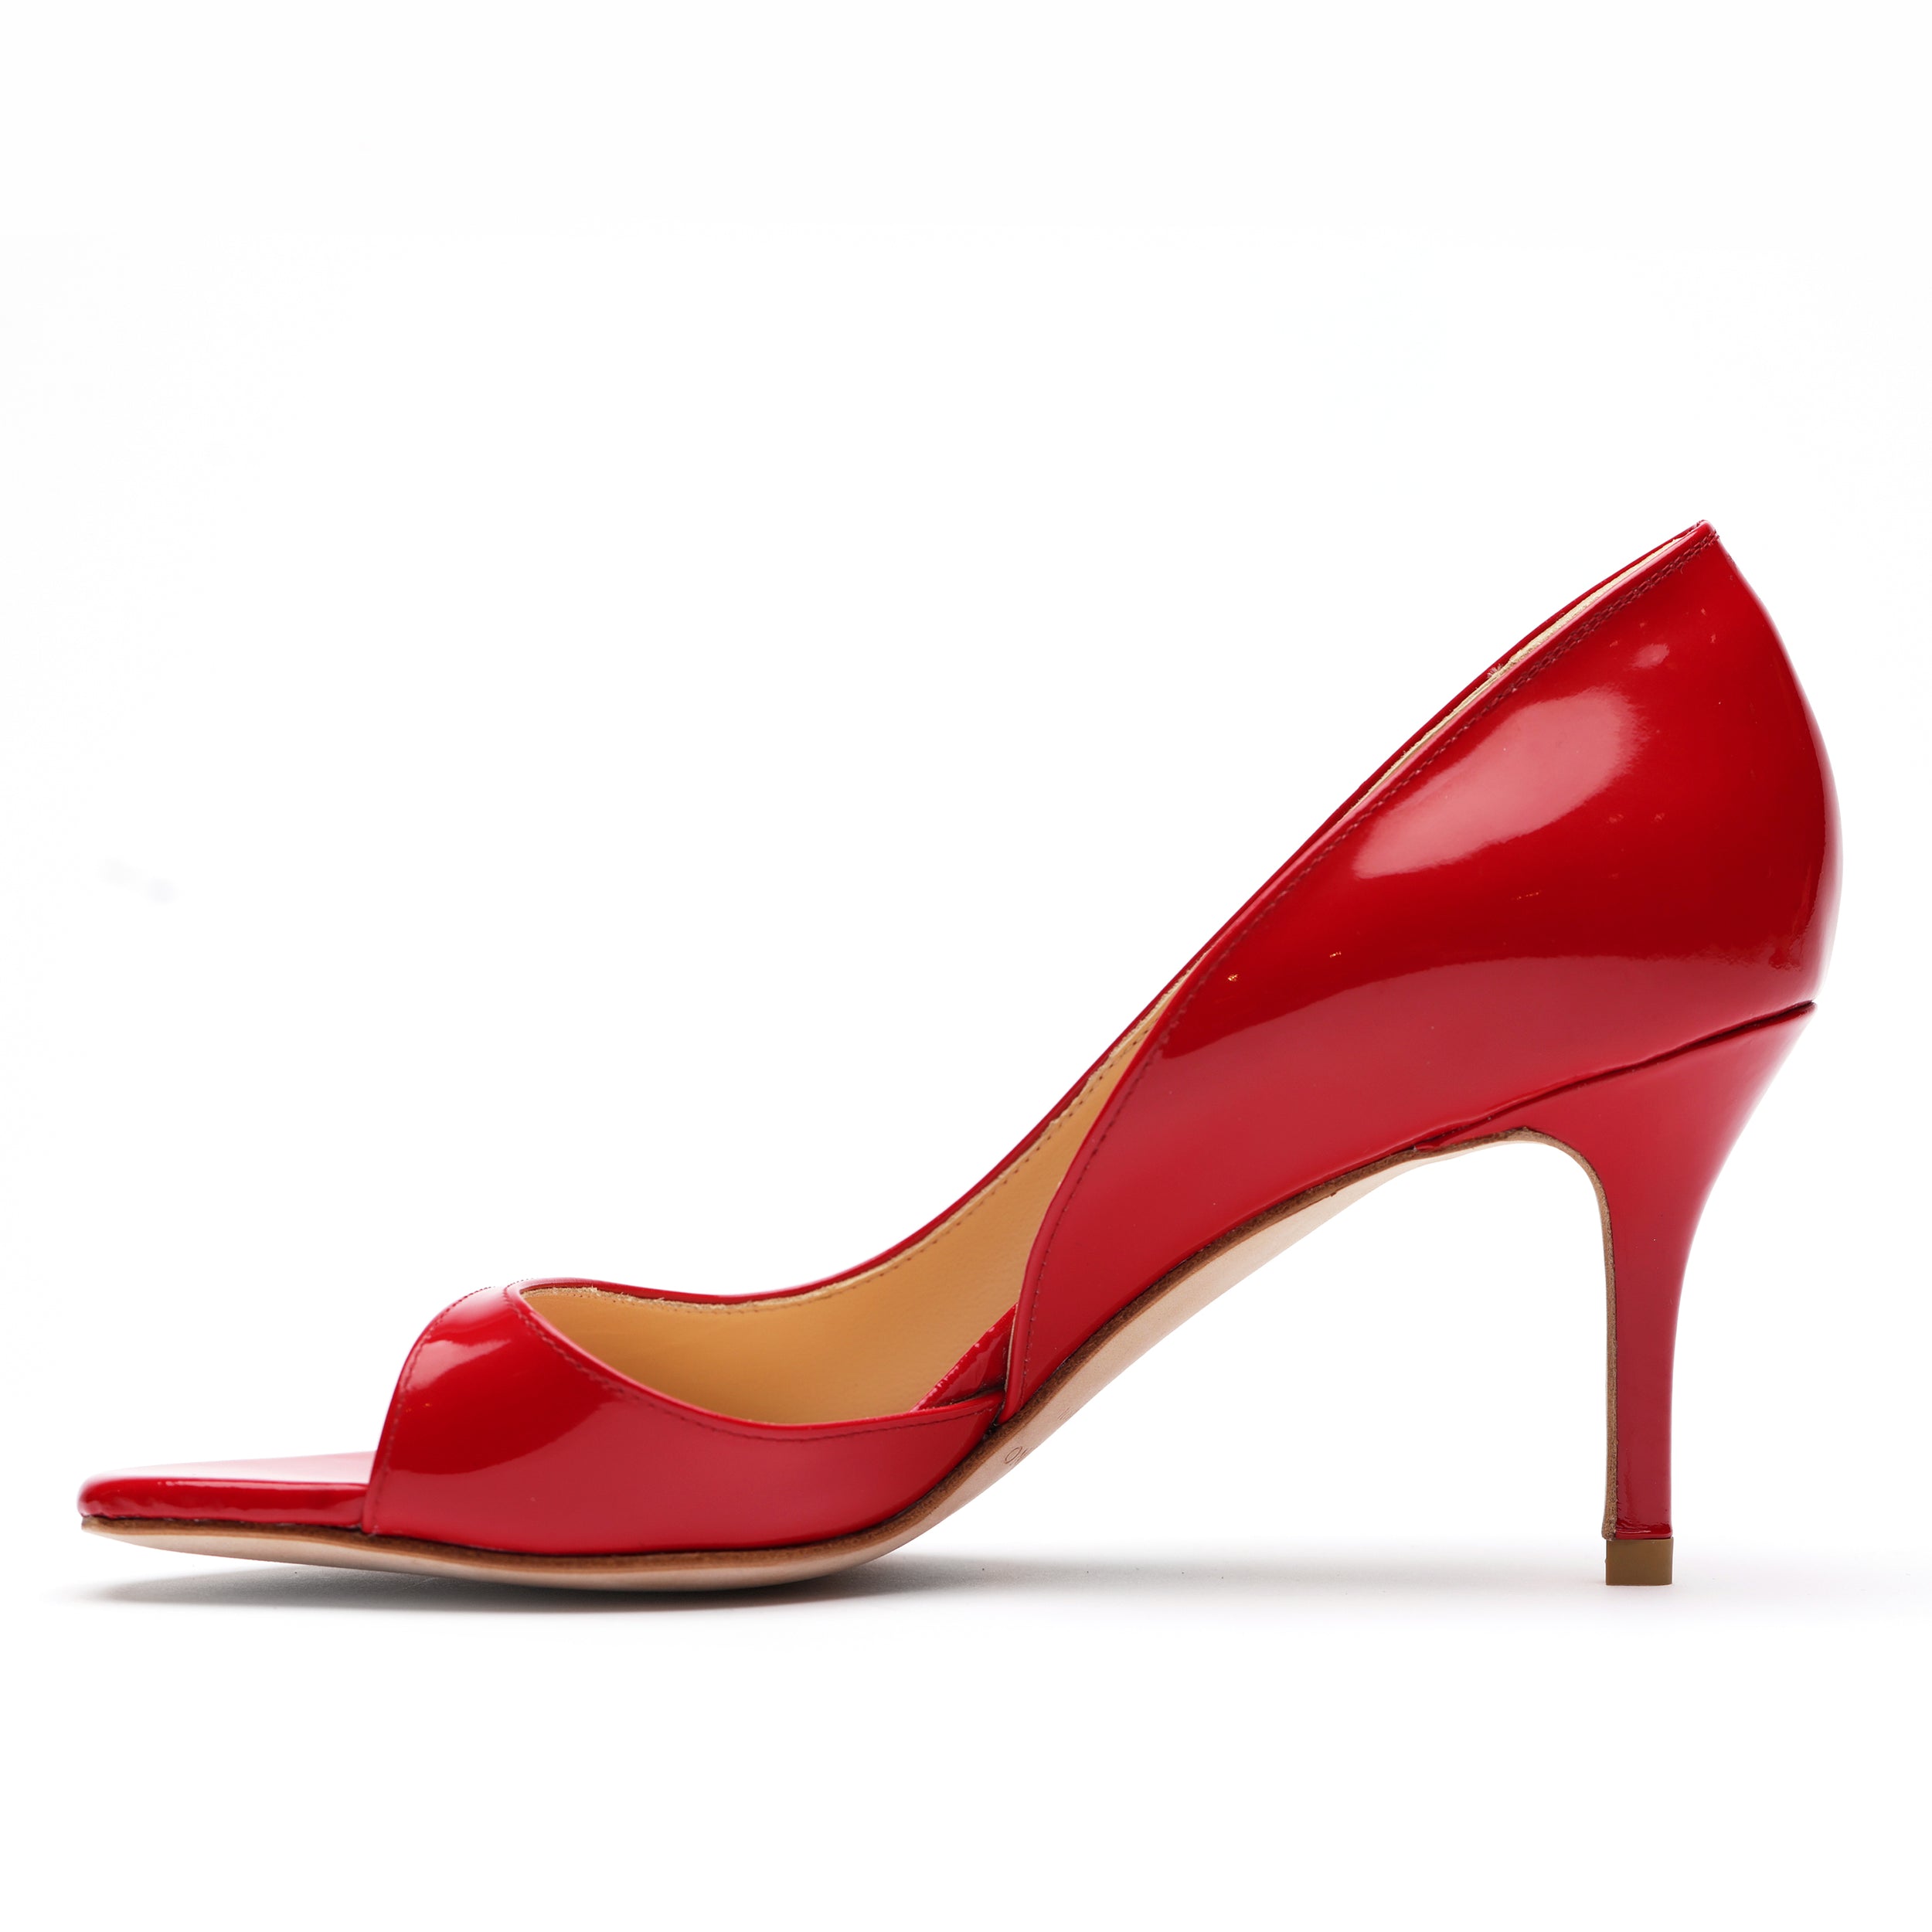 [women's] reunion - d'Orsay sandals - red patent leather